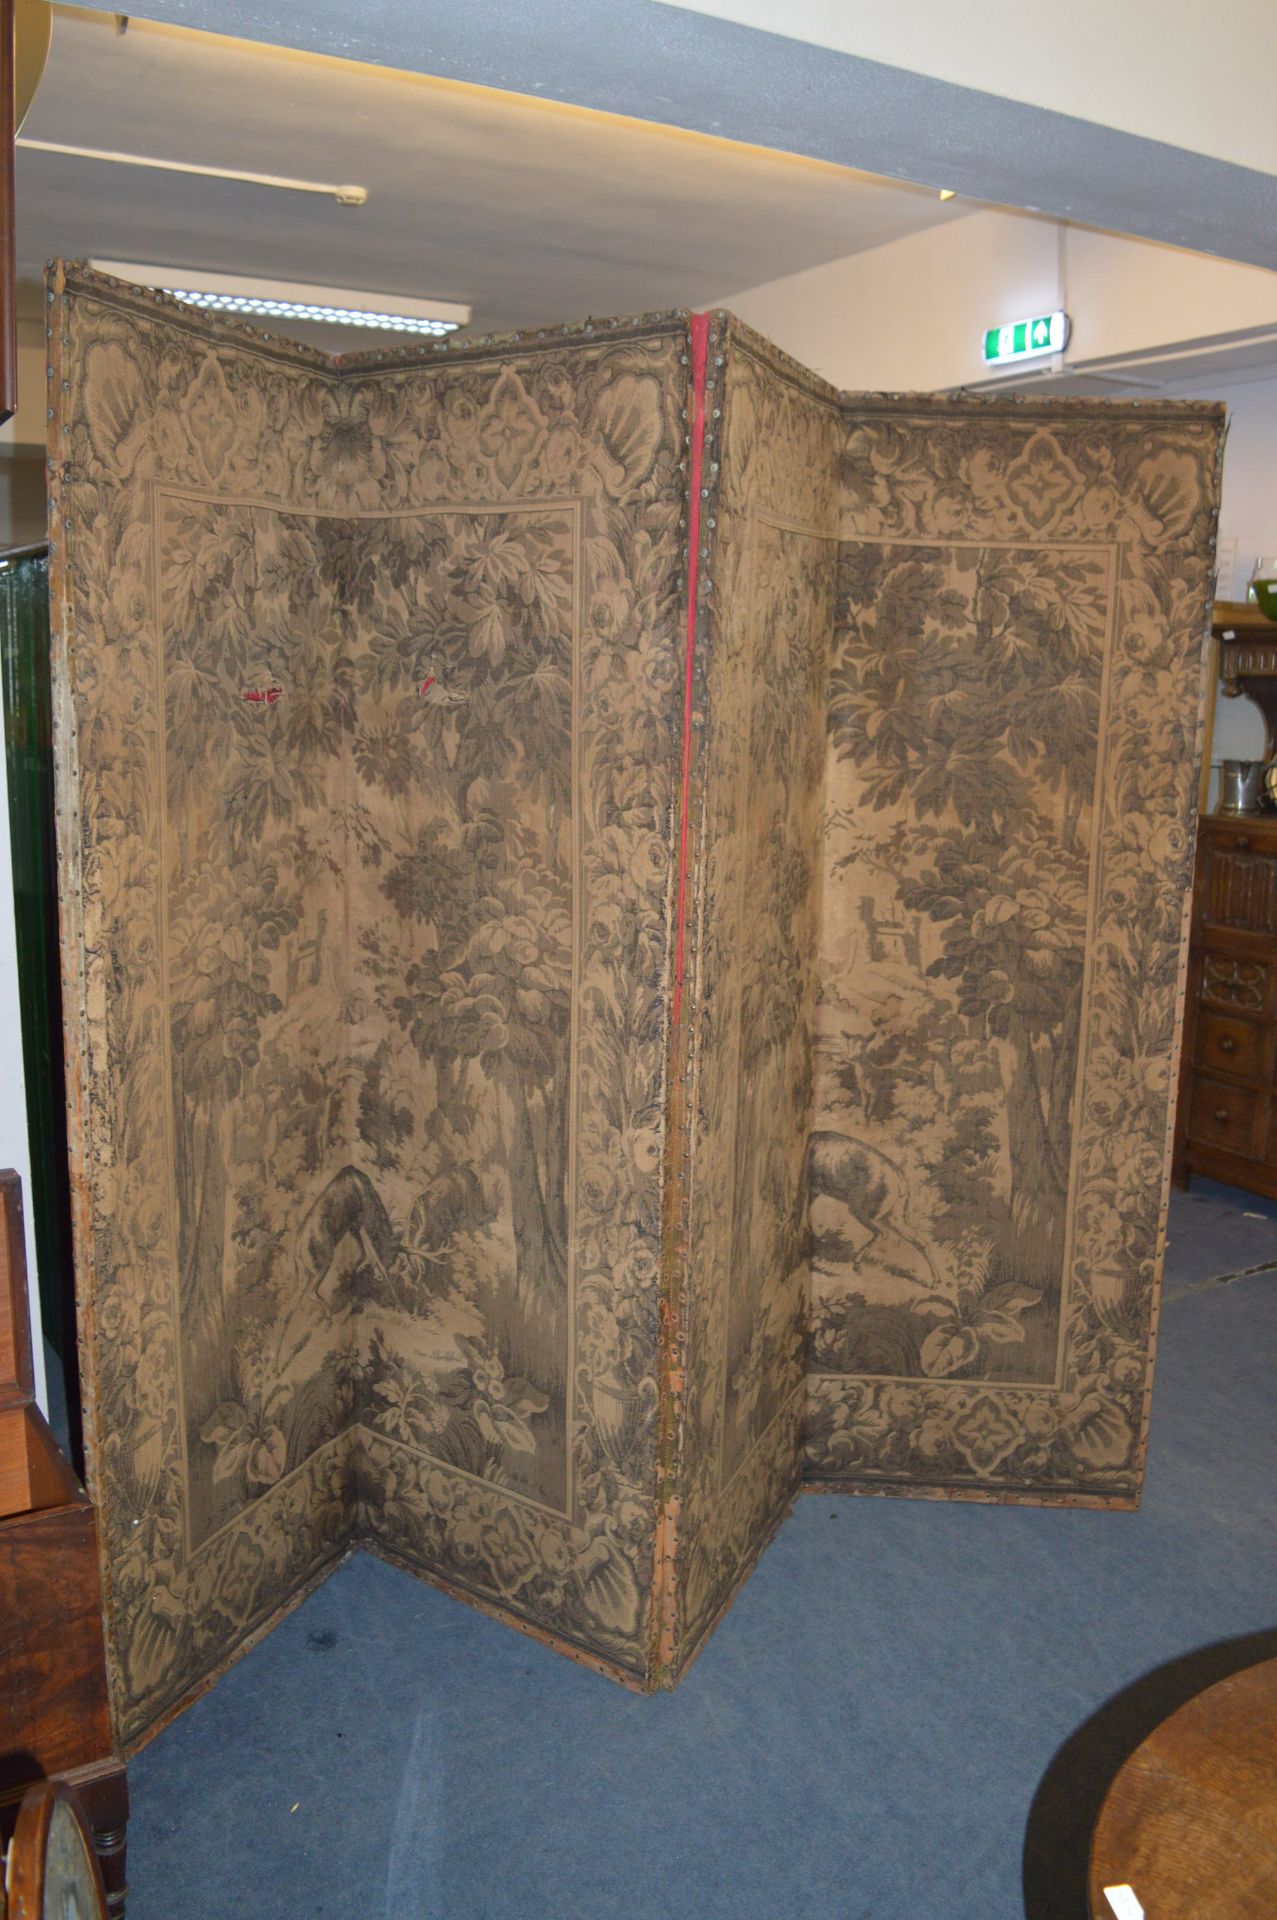 Large Folding Screen with Embroidered Panels